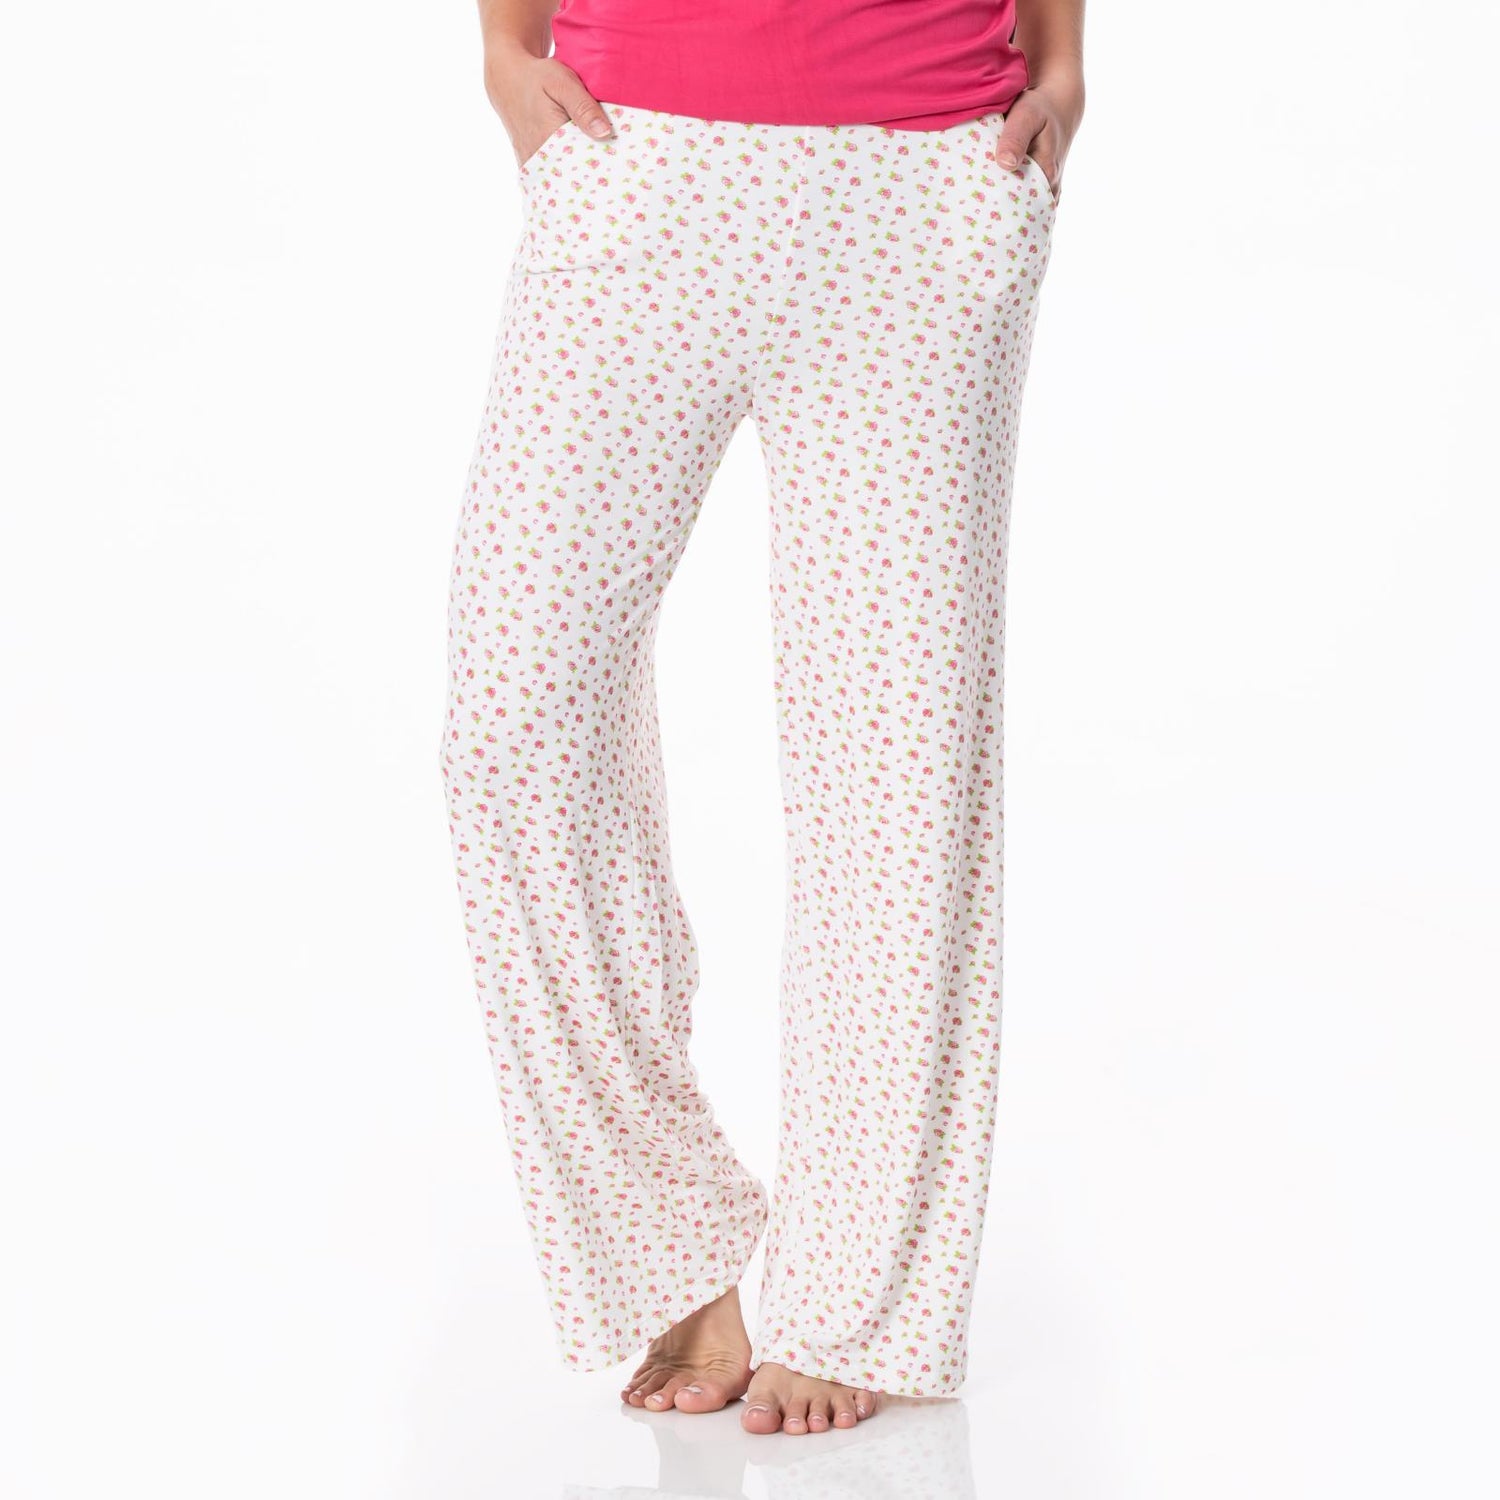 Women's Print Lounge Pants in Natural Buds